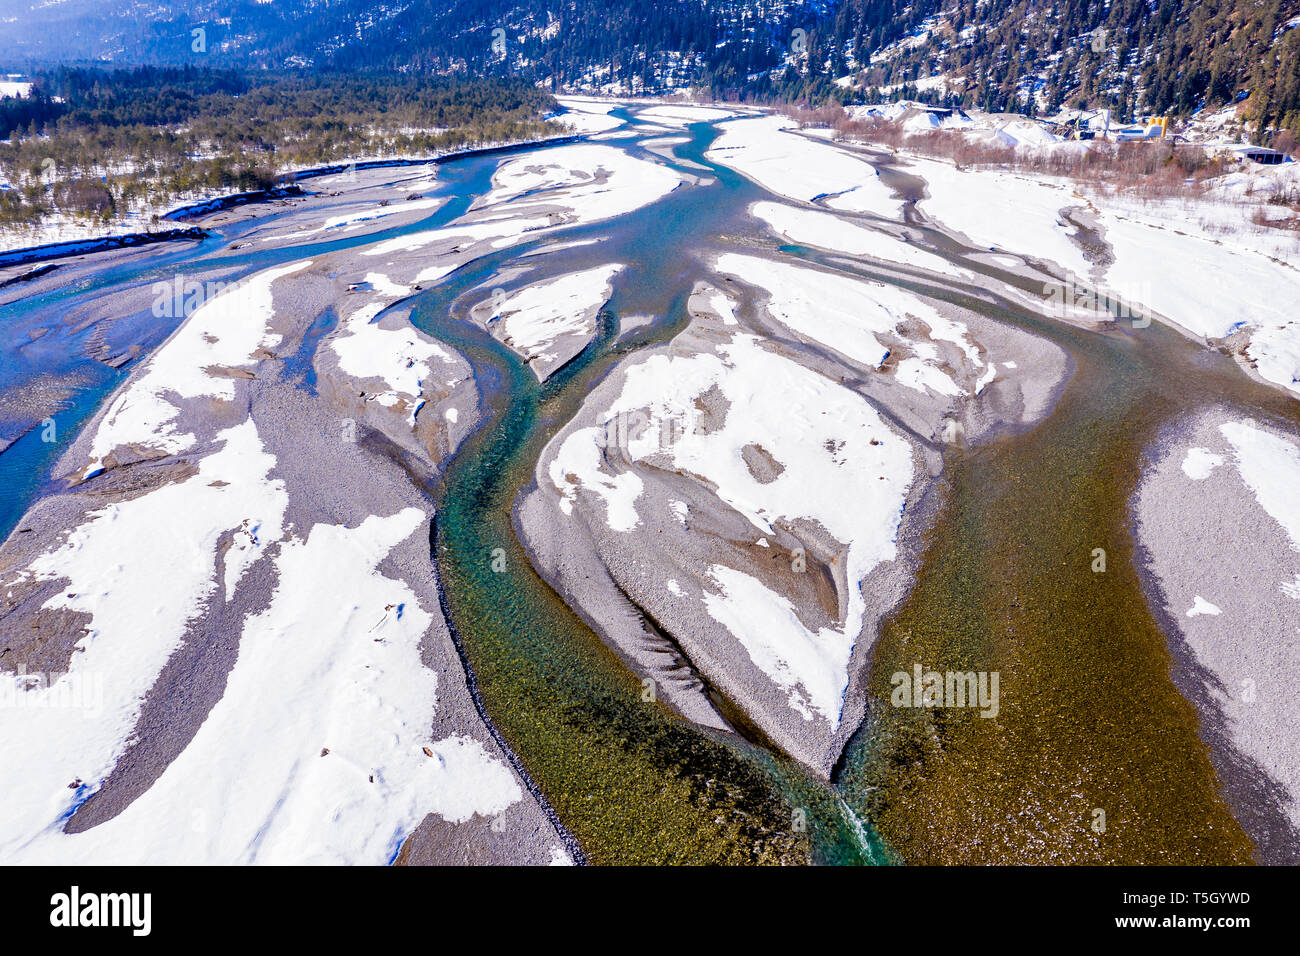 Austria, Tirol, Lech valley, Lech river in winter, aerial image Stock Photo